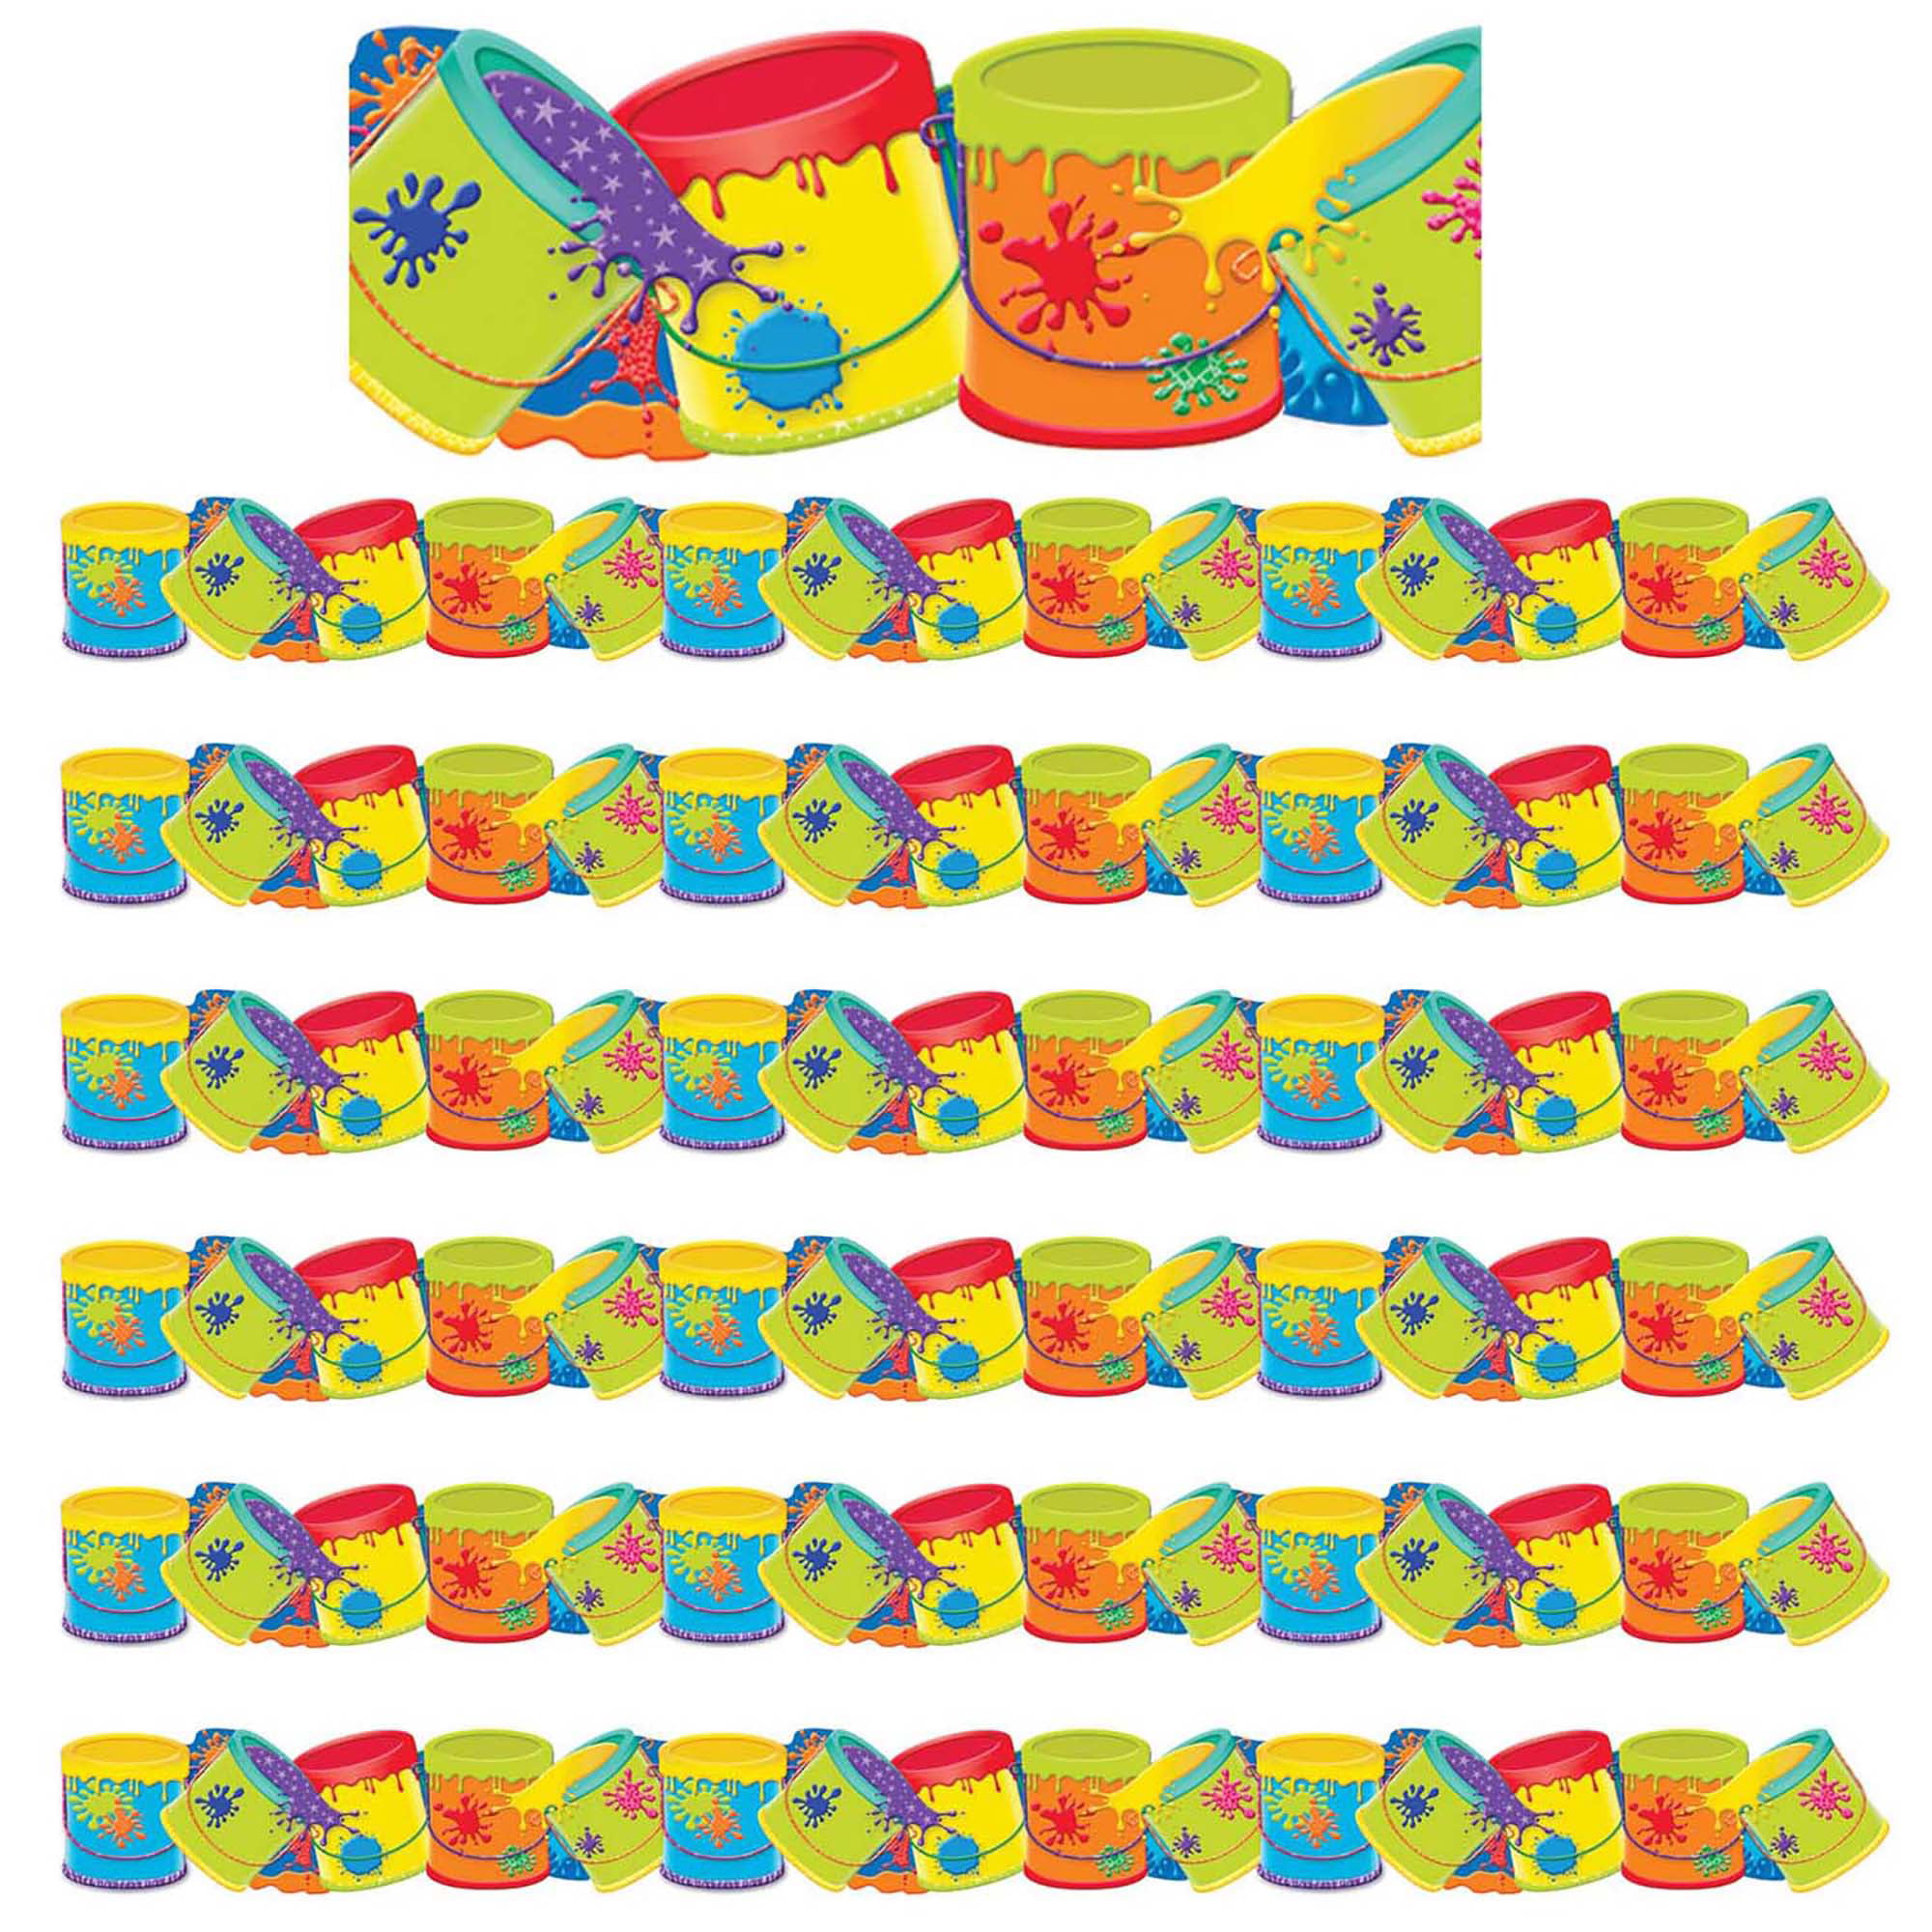 Eureka Color My World Paint Buckets 36 Assorted Paper Cutouts Free Shipping! 